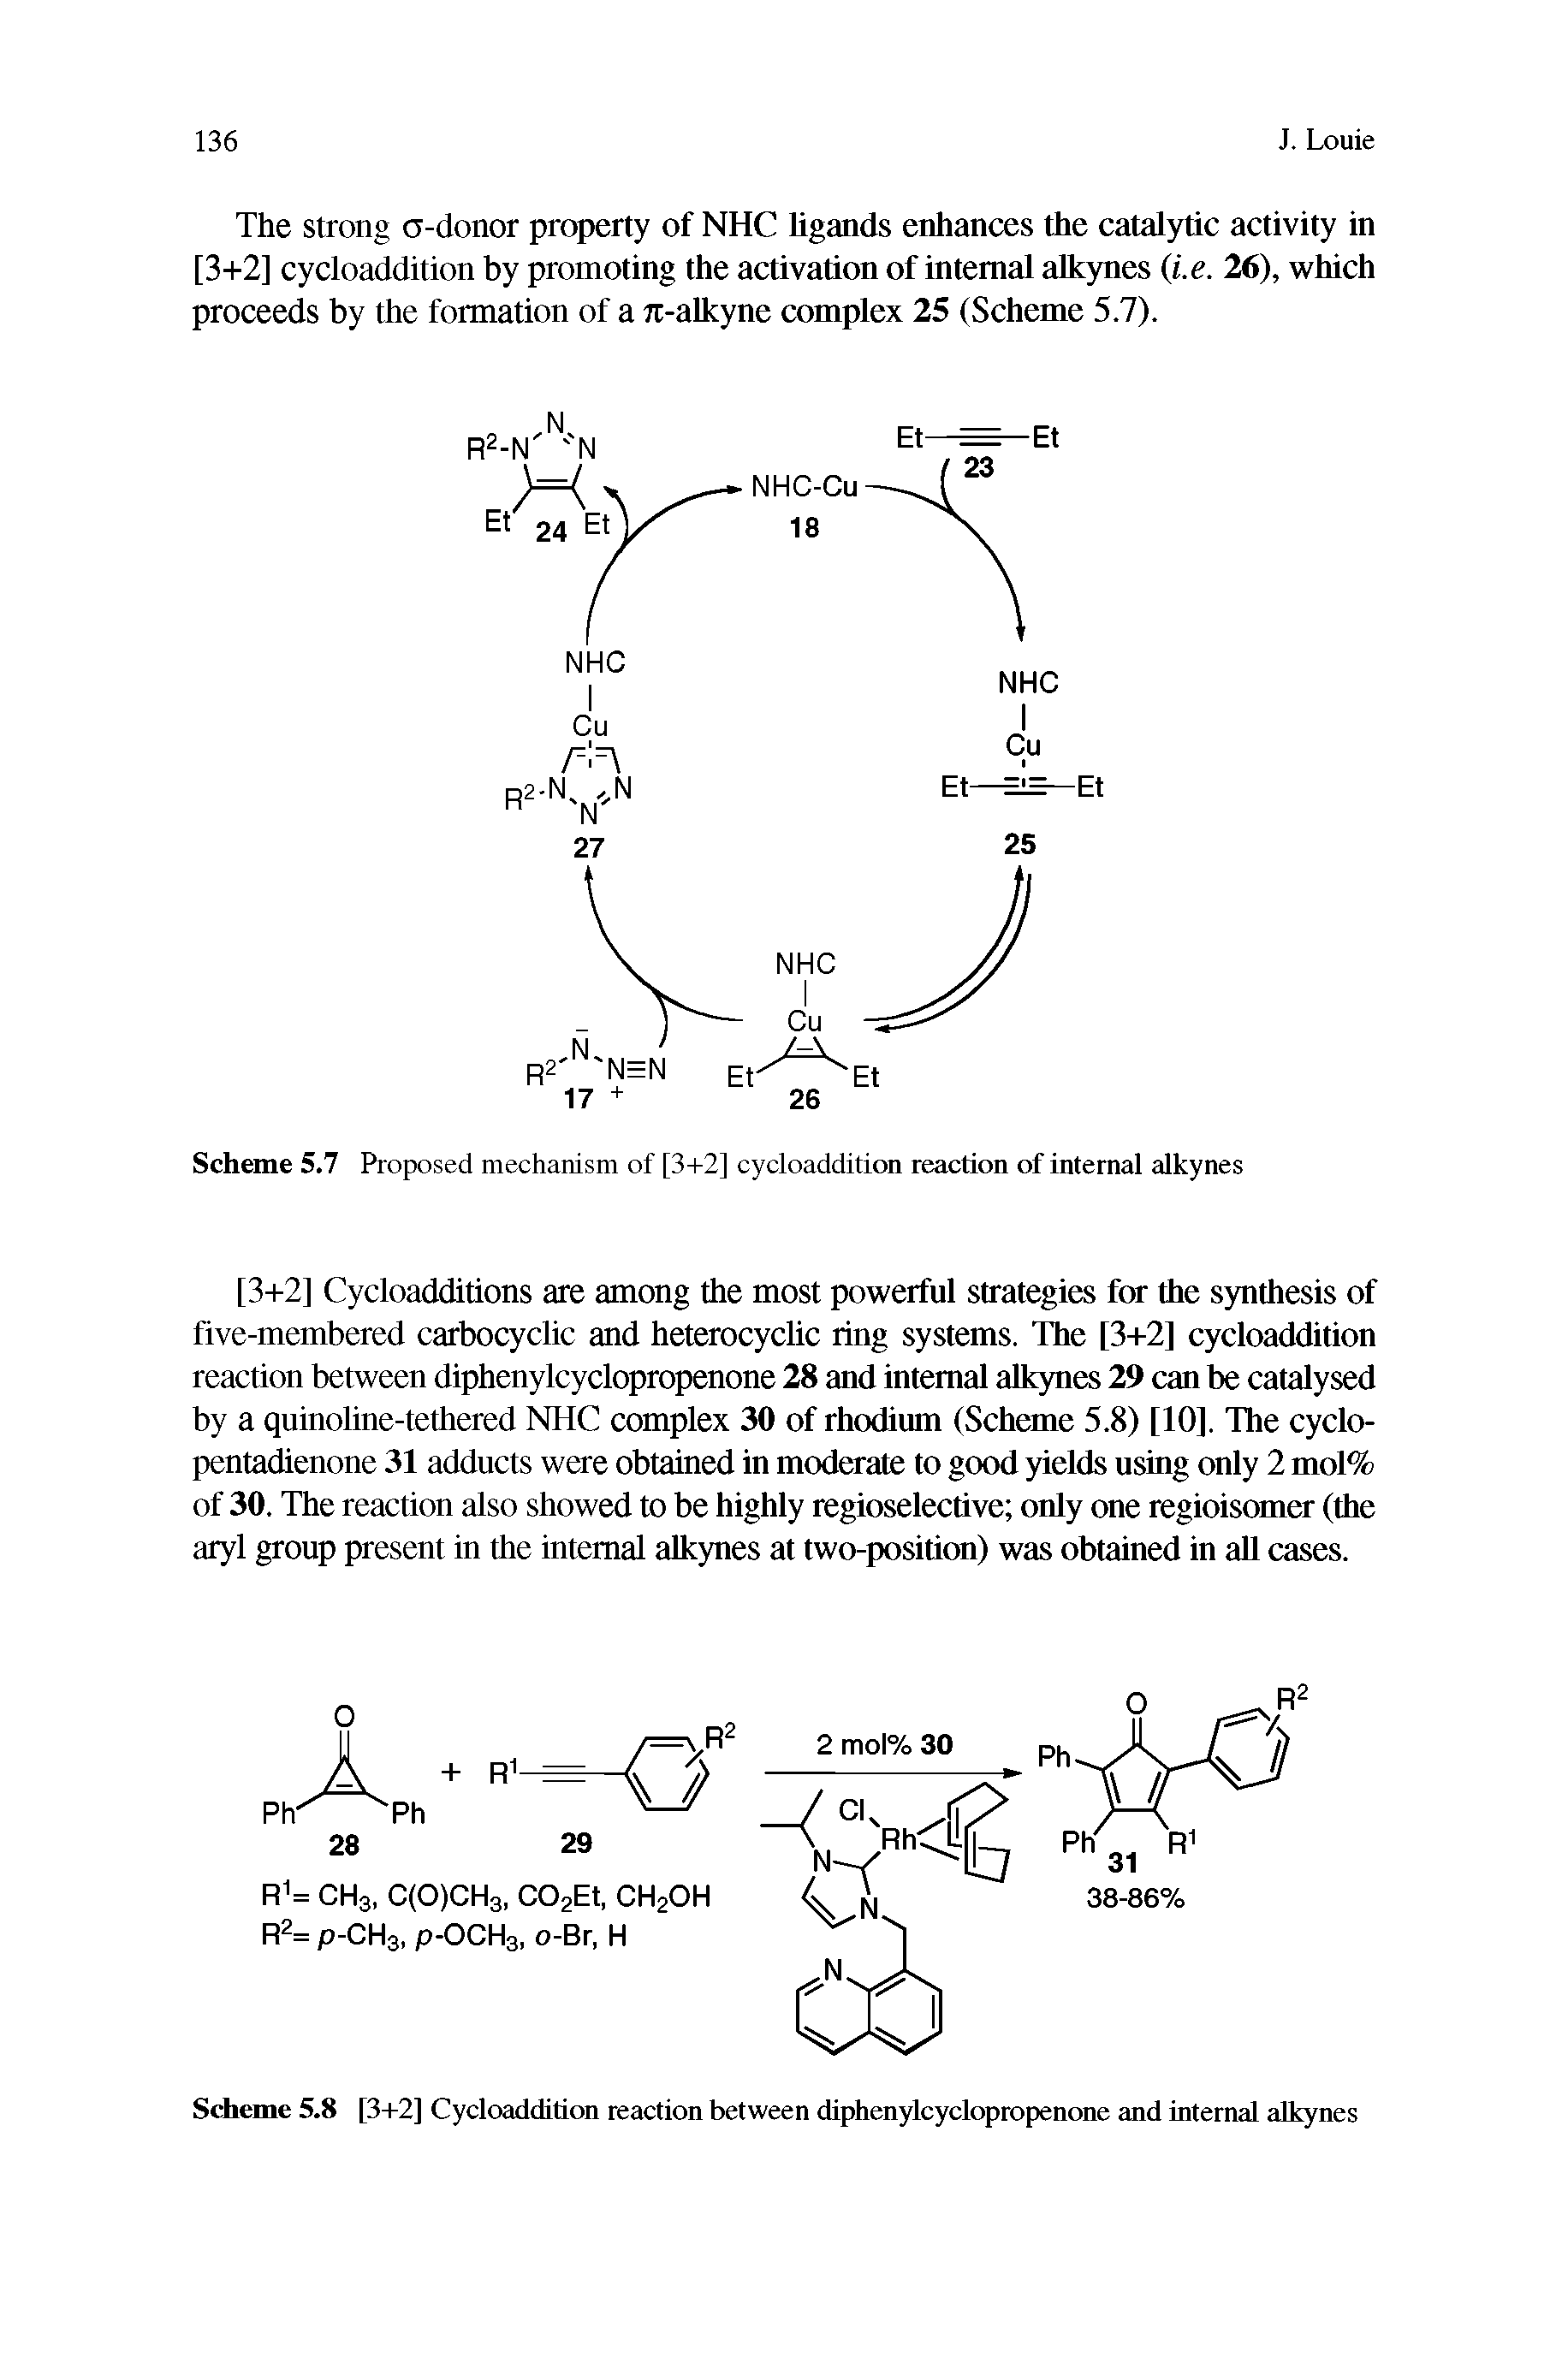 Scheme 5.7 Proposed mechanism of [3+2] cycloaddition reaction of internal alkynes...